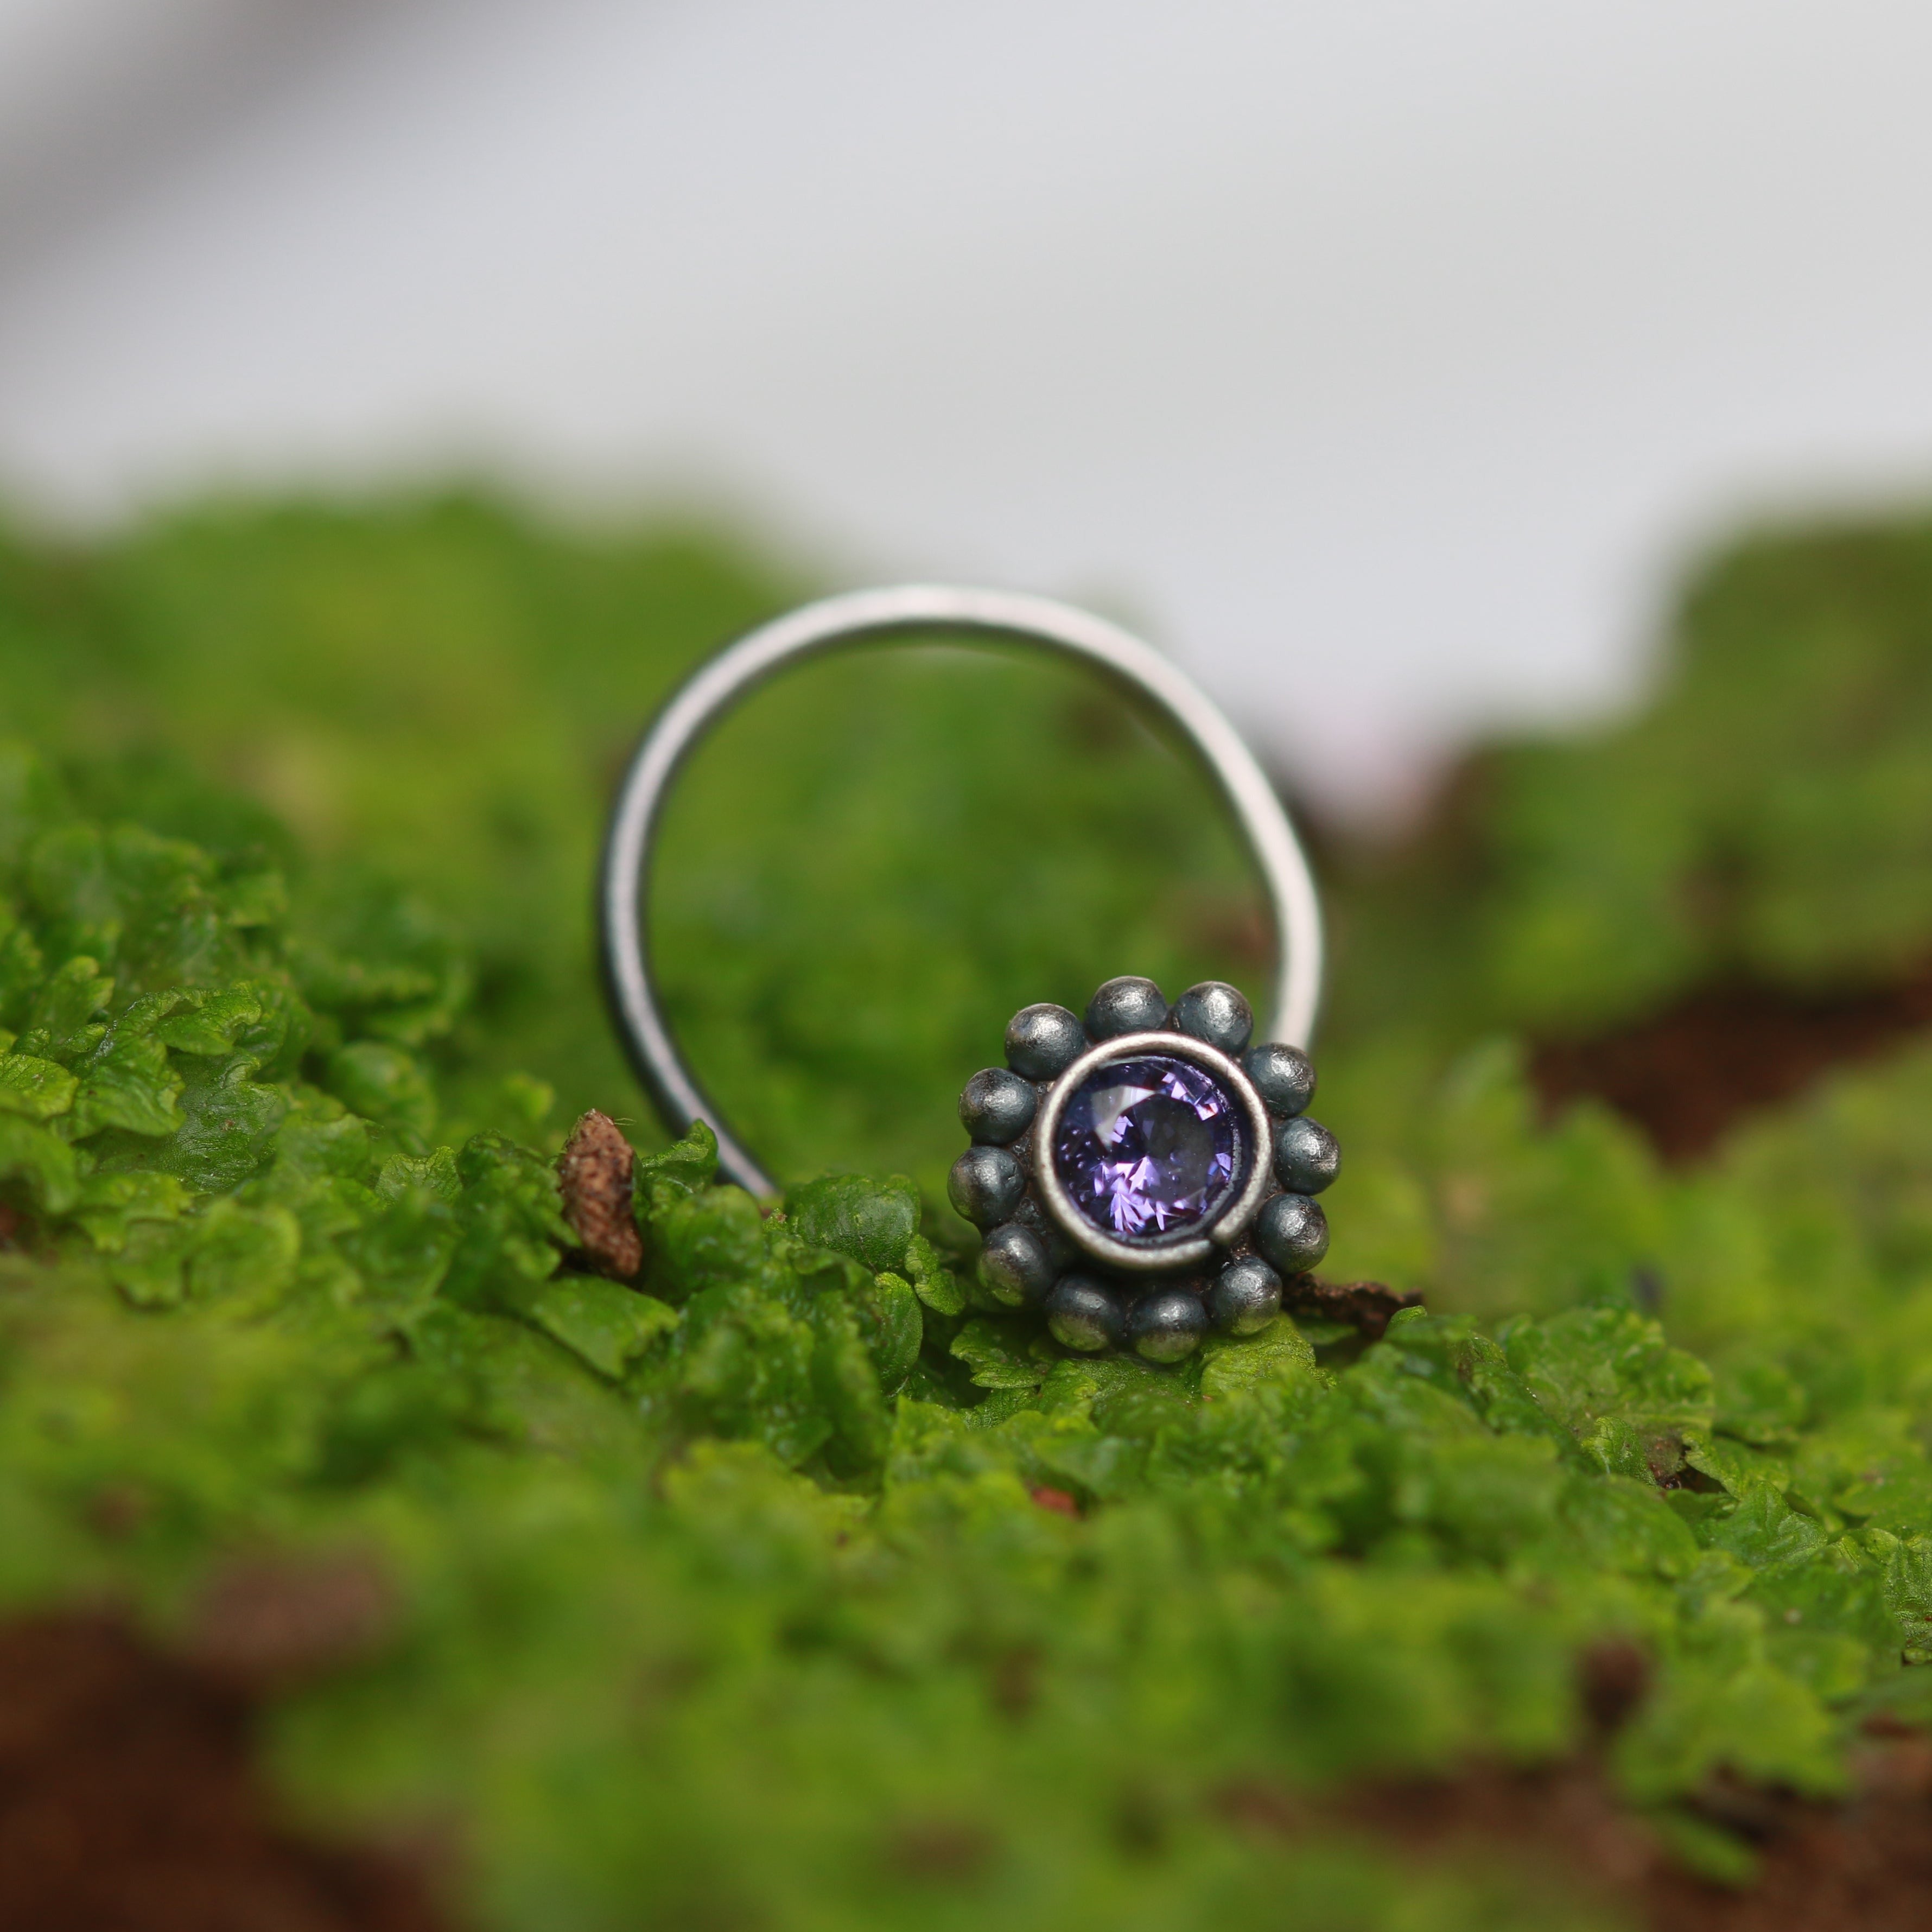 a close up of a ring on a mossy surface